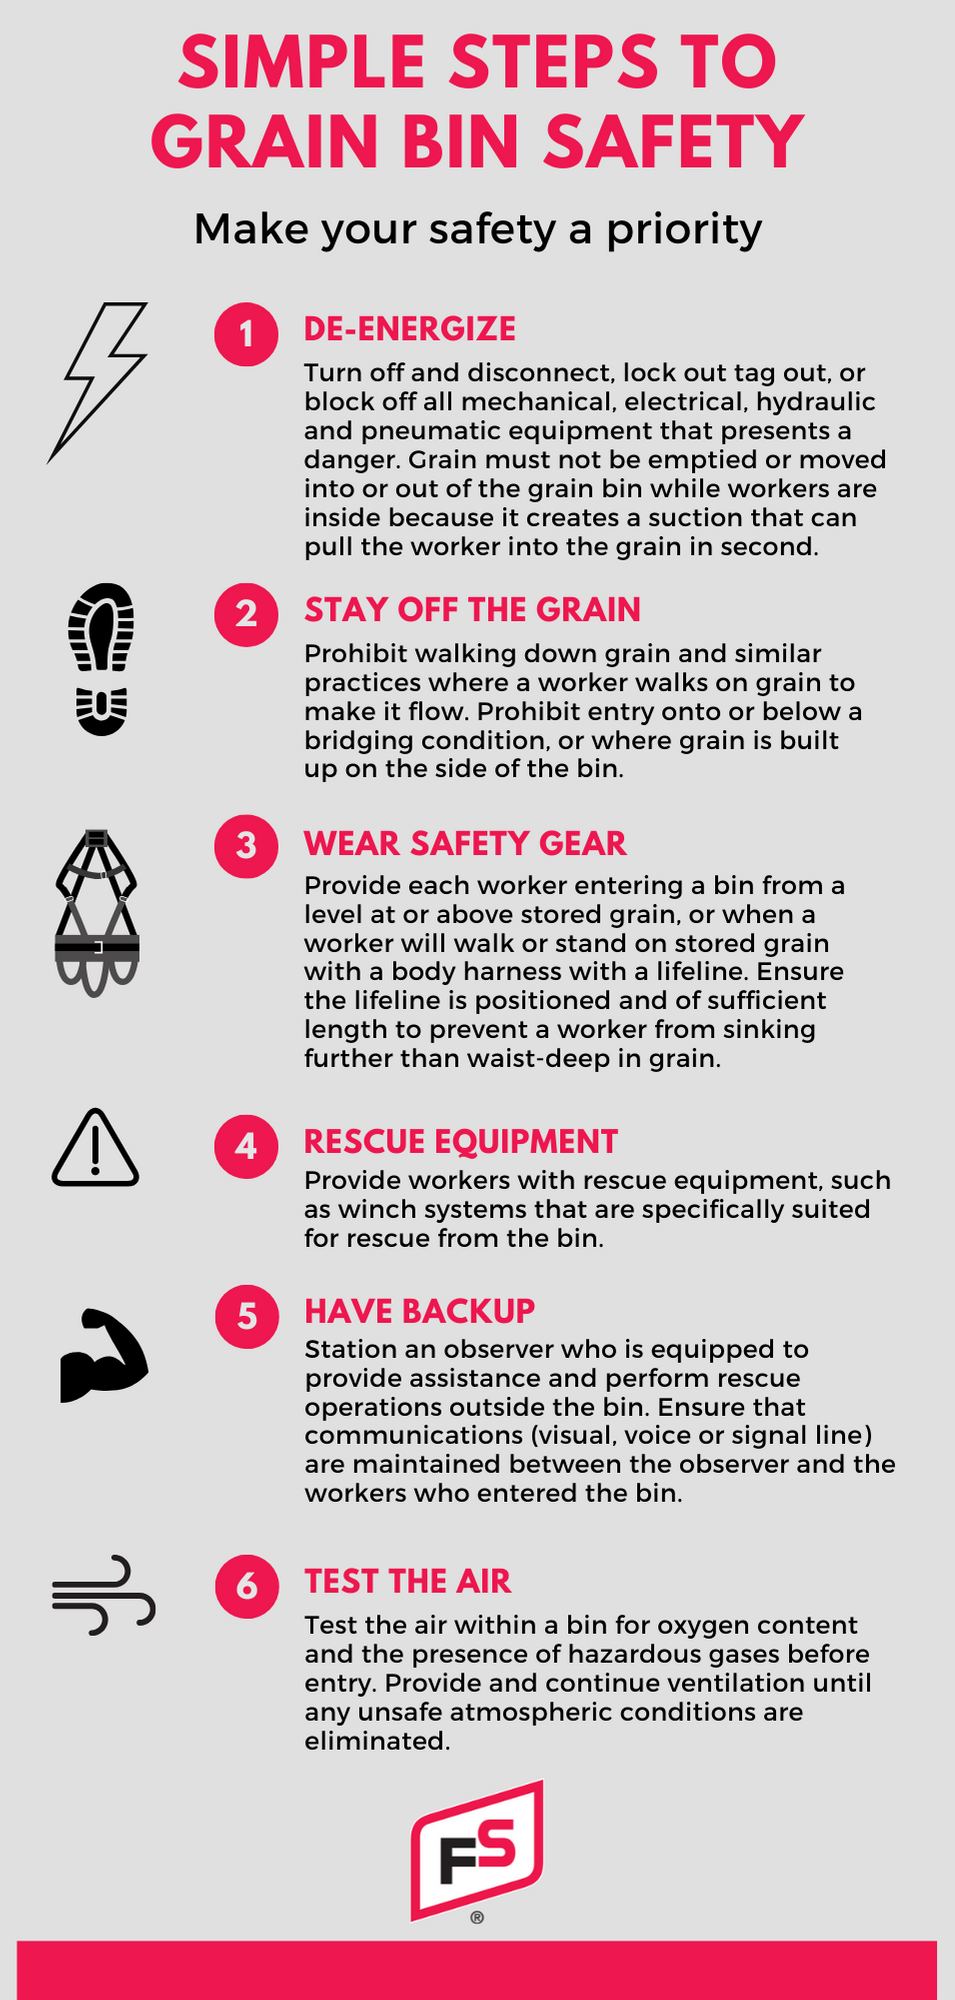 Simple Steps to Grain Bin Safety